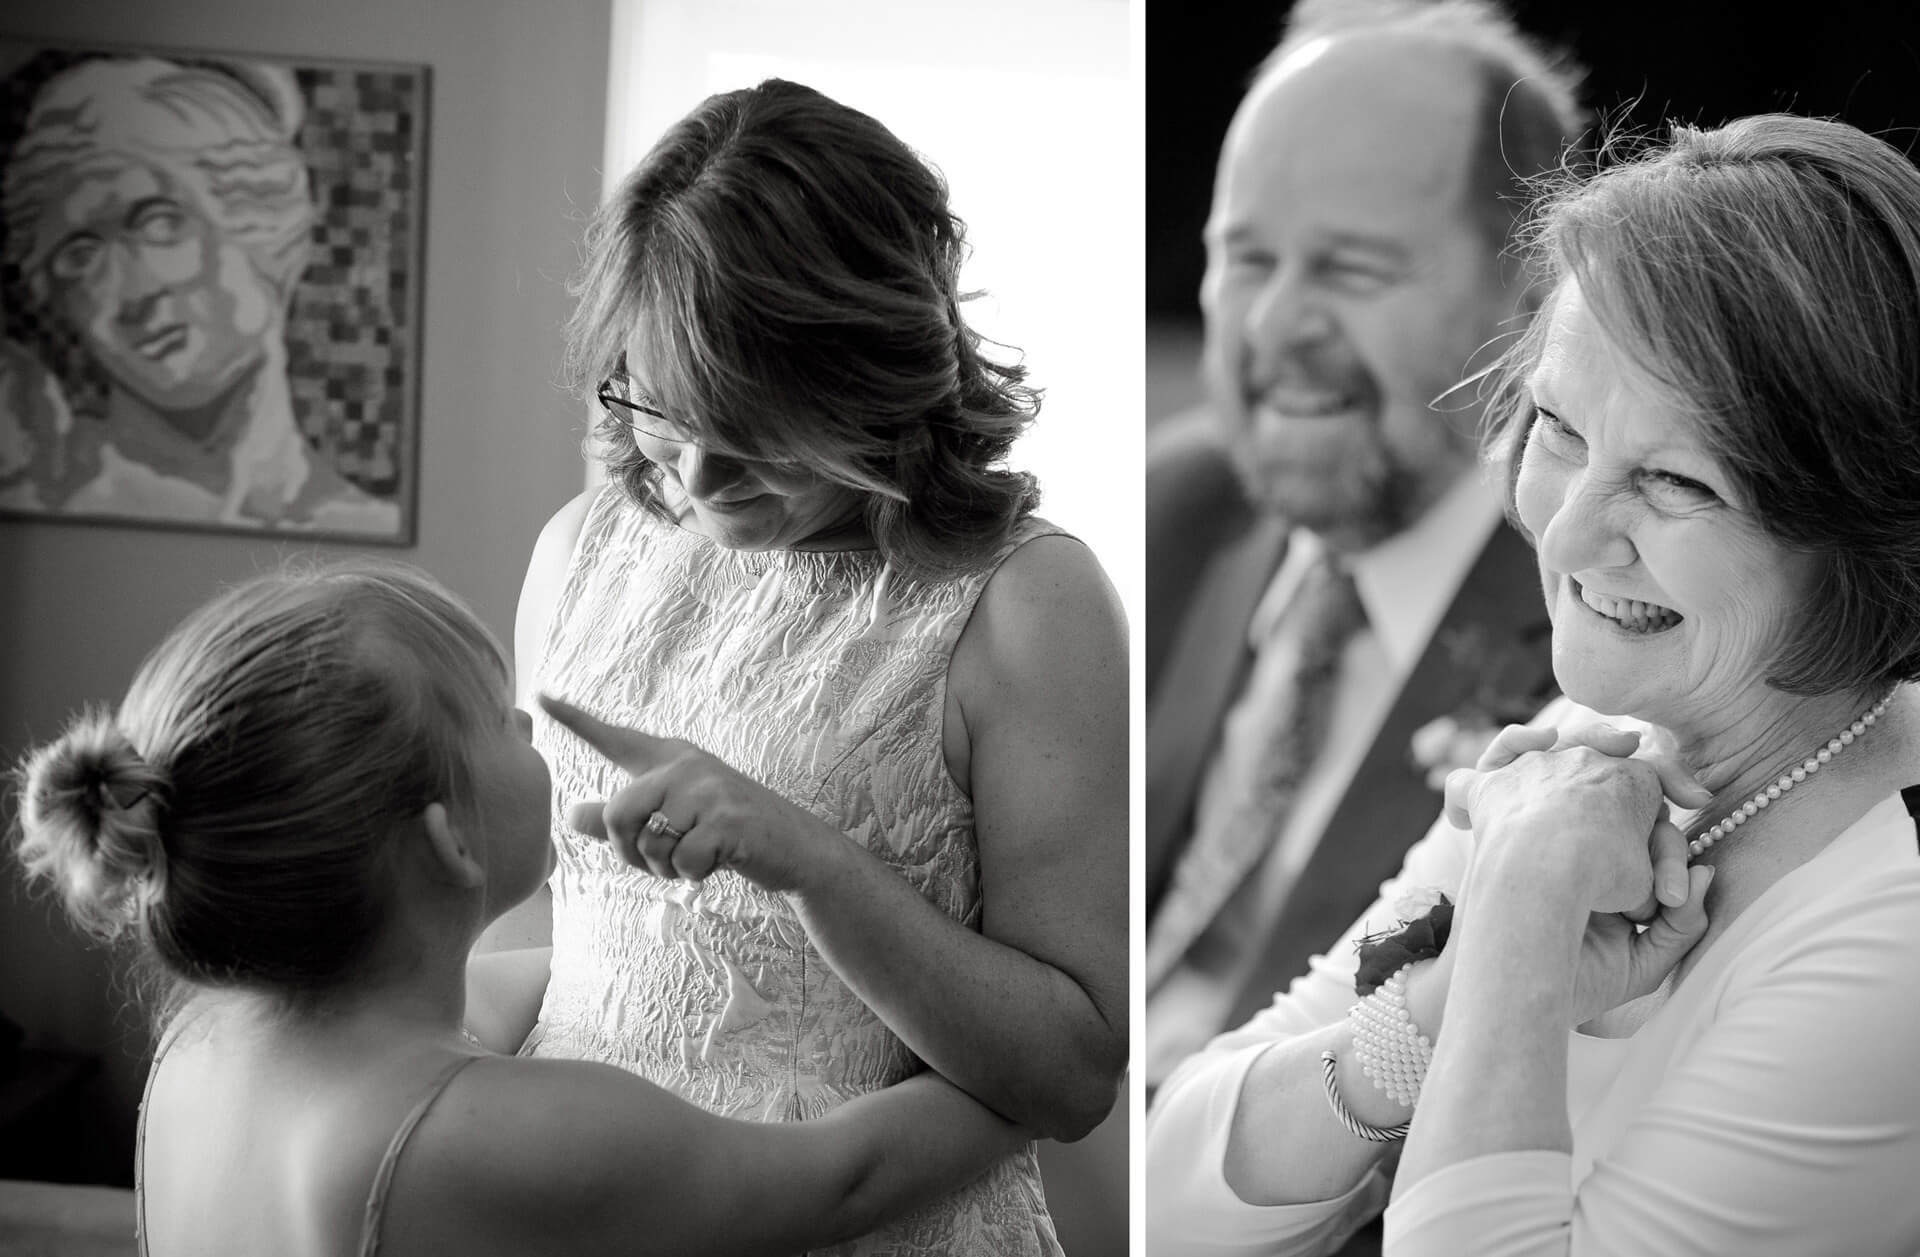 Capturing fleeting moments during weddings is my forte as an affordable wedding photojournalist. These Ann Arbor, Michigan and West Bloomfield, Michigan weddings are just two examples of many.